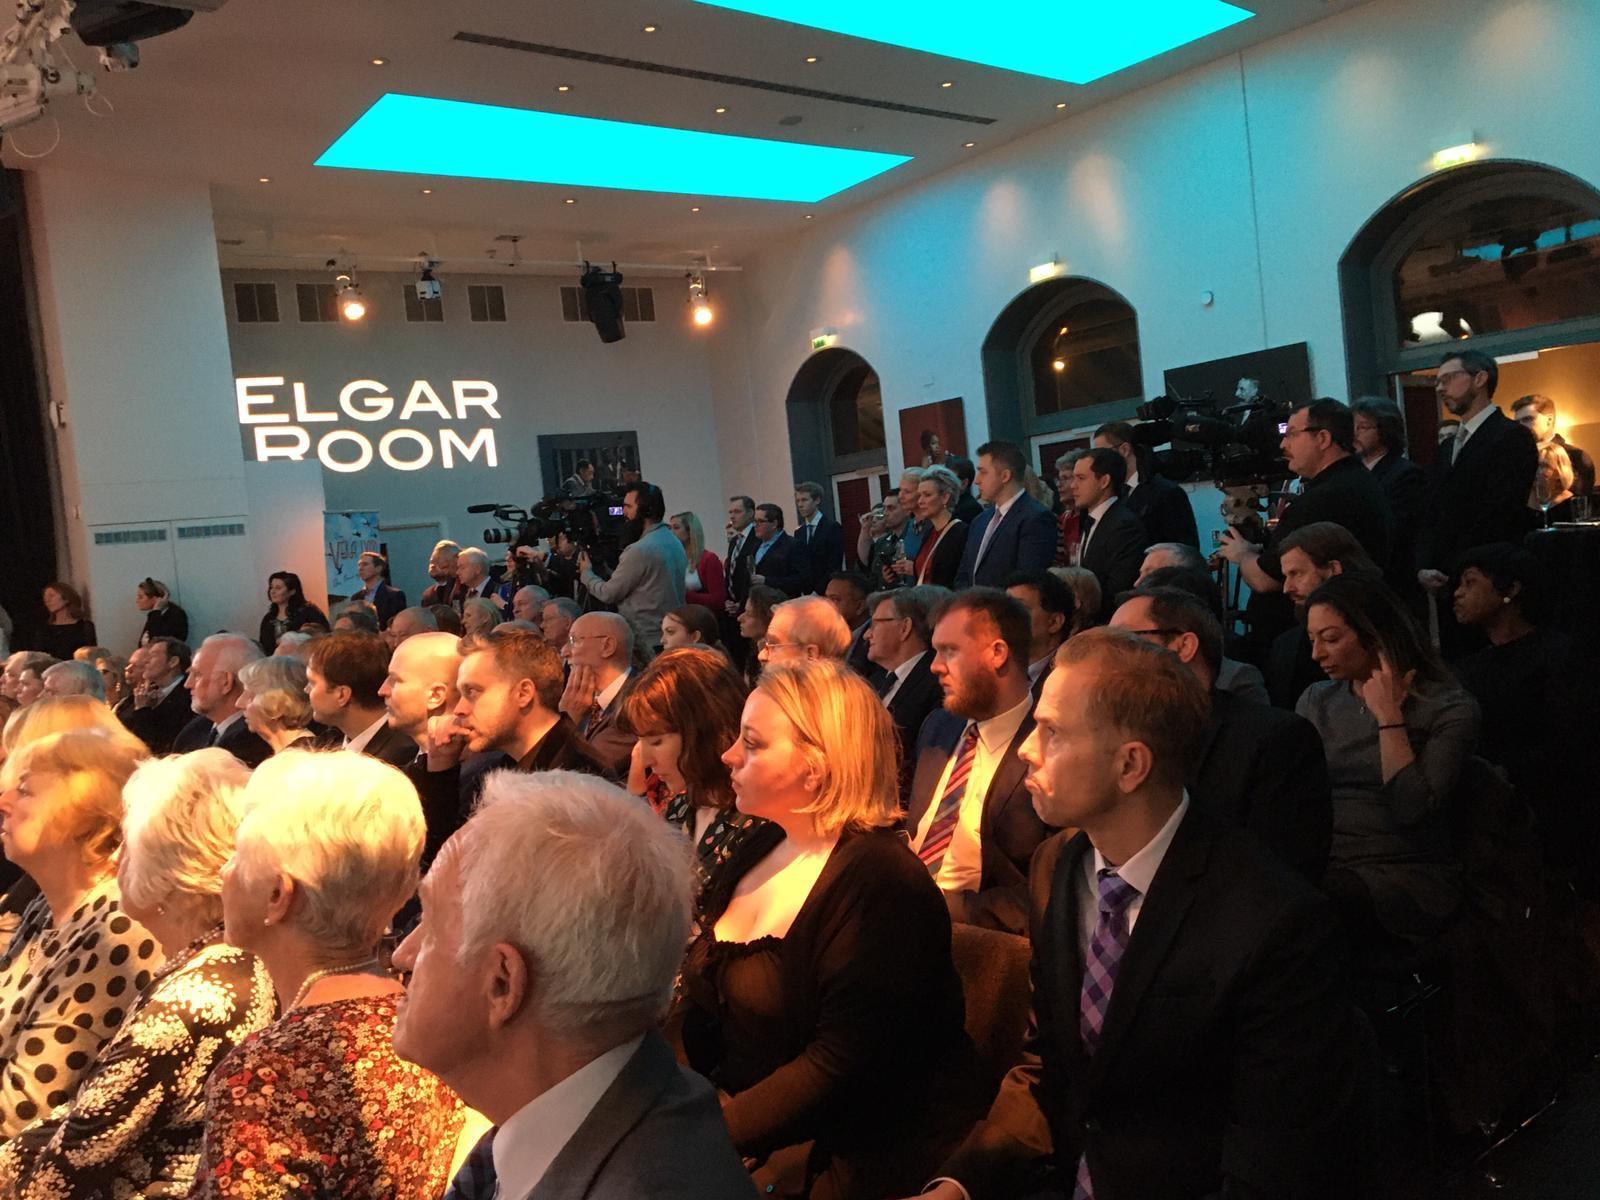 More than 100 people attended the event at the Royal Albert Hall